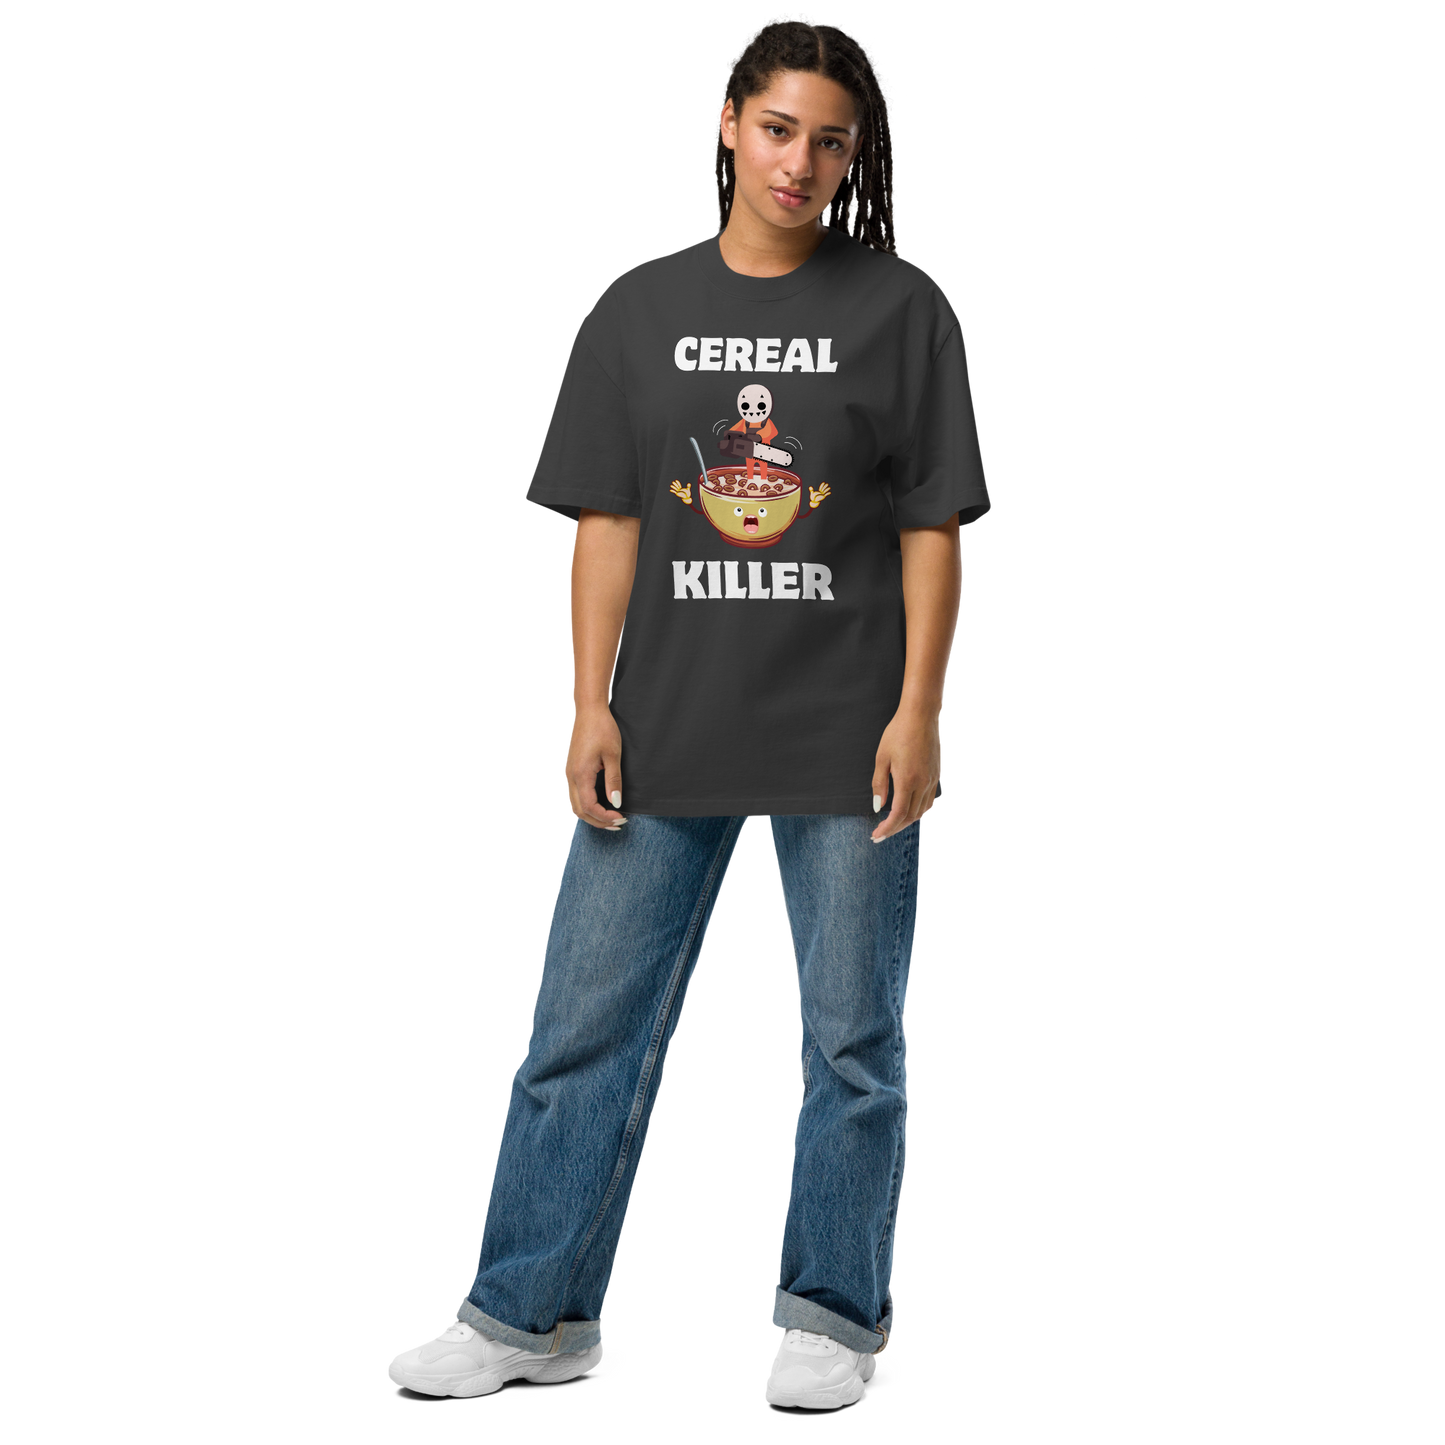 Woman wearing a Faded Black Cereal Killer Oversized T-Shirt featuring a Cereal Killer graphic on the chest - Funny Graphic Oversized Tees - Boozy Fox